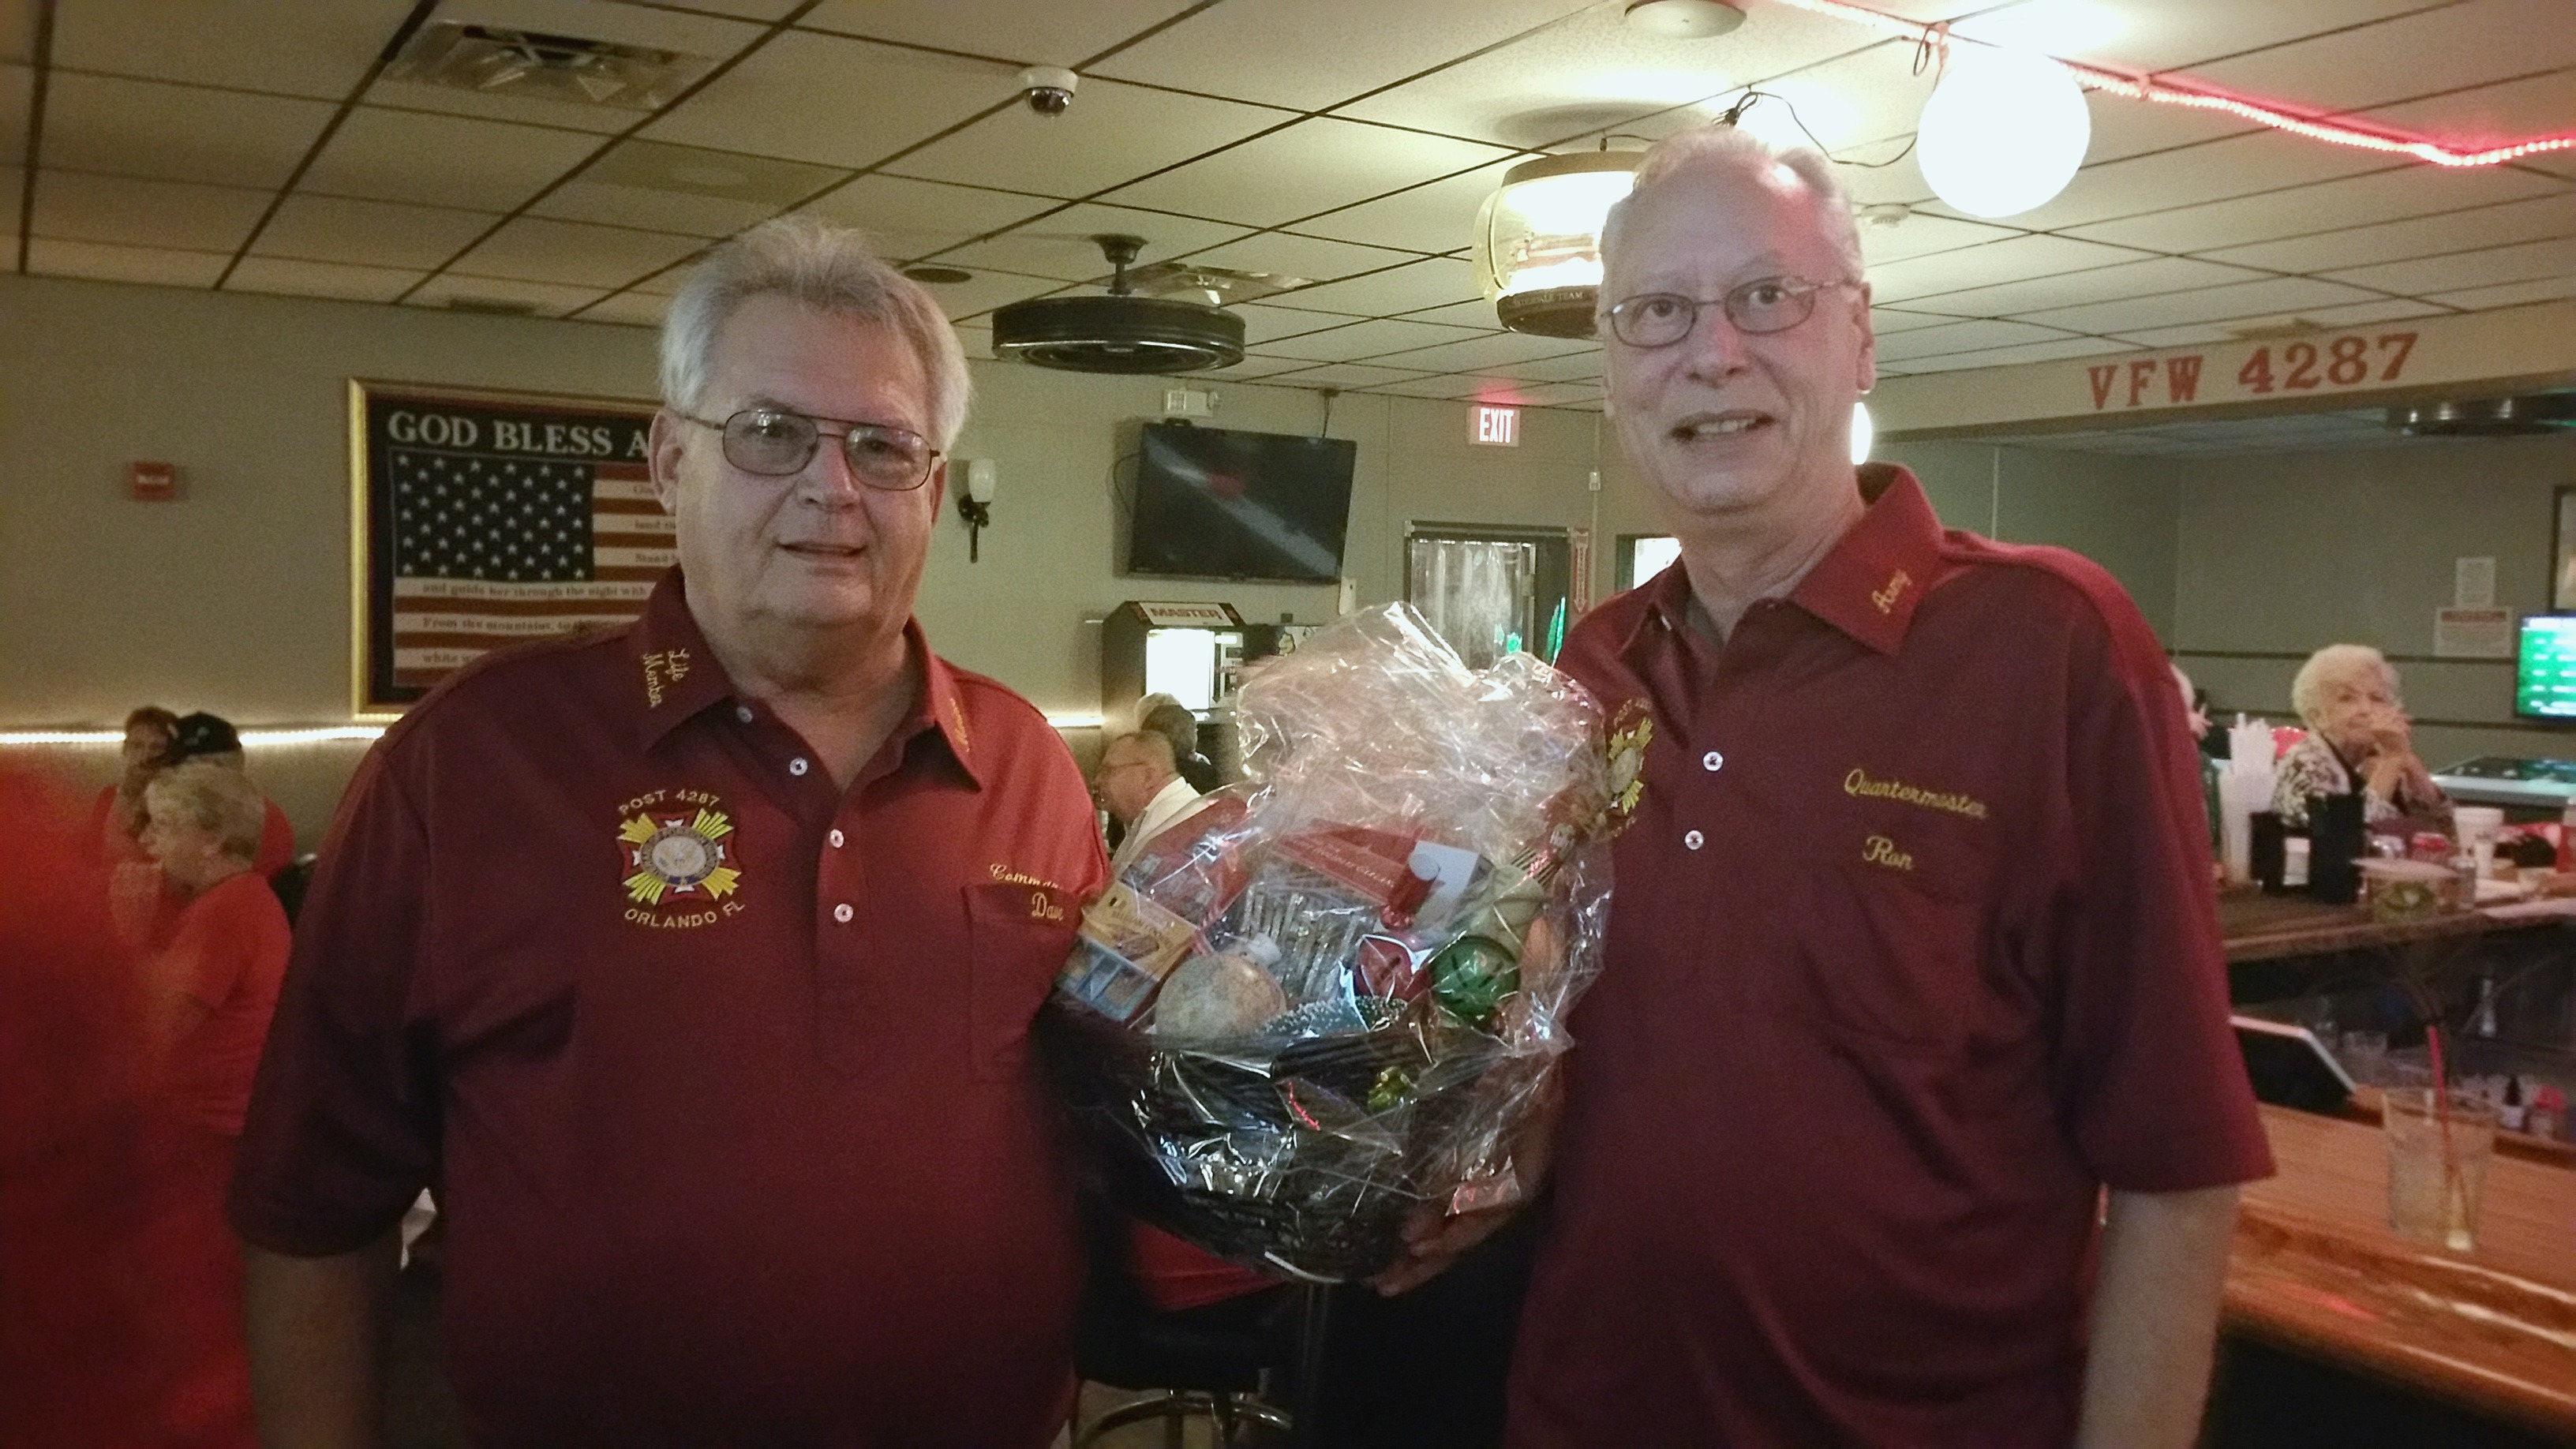 sharing-the-joy-of-the-season-with-my-local-vfw